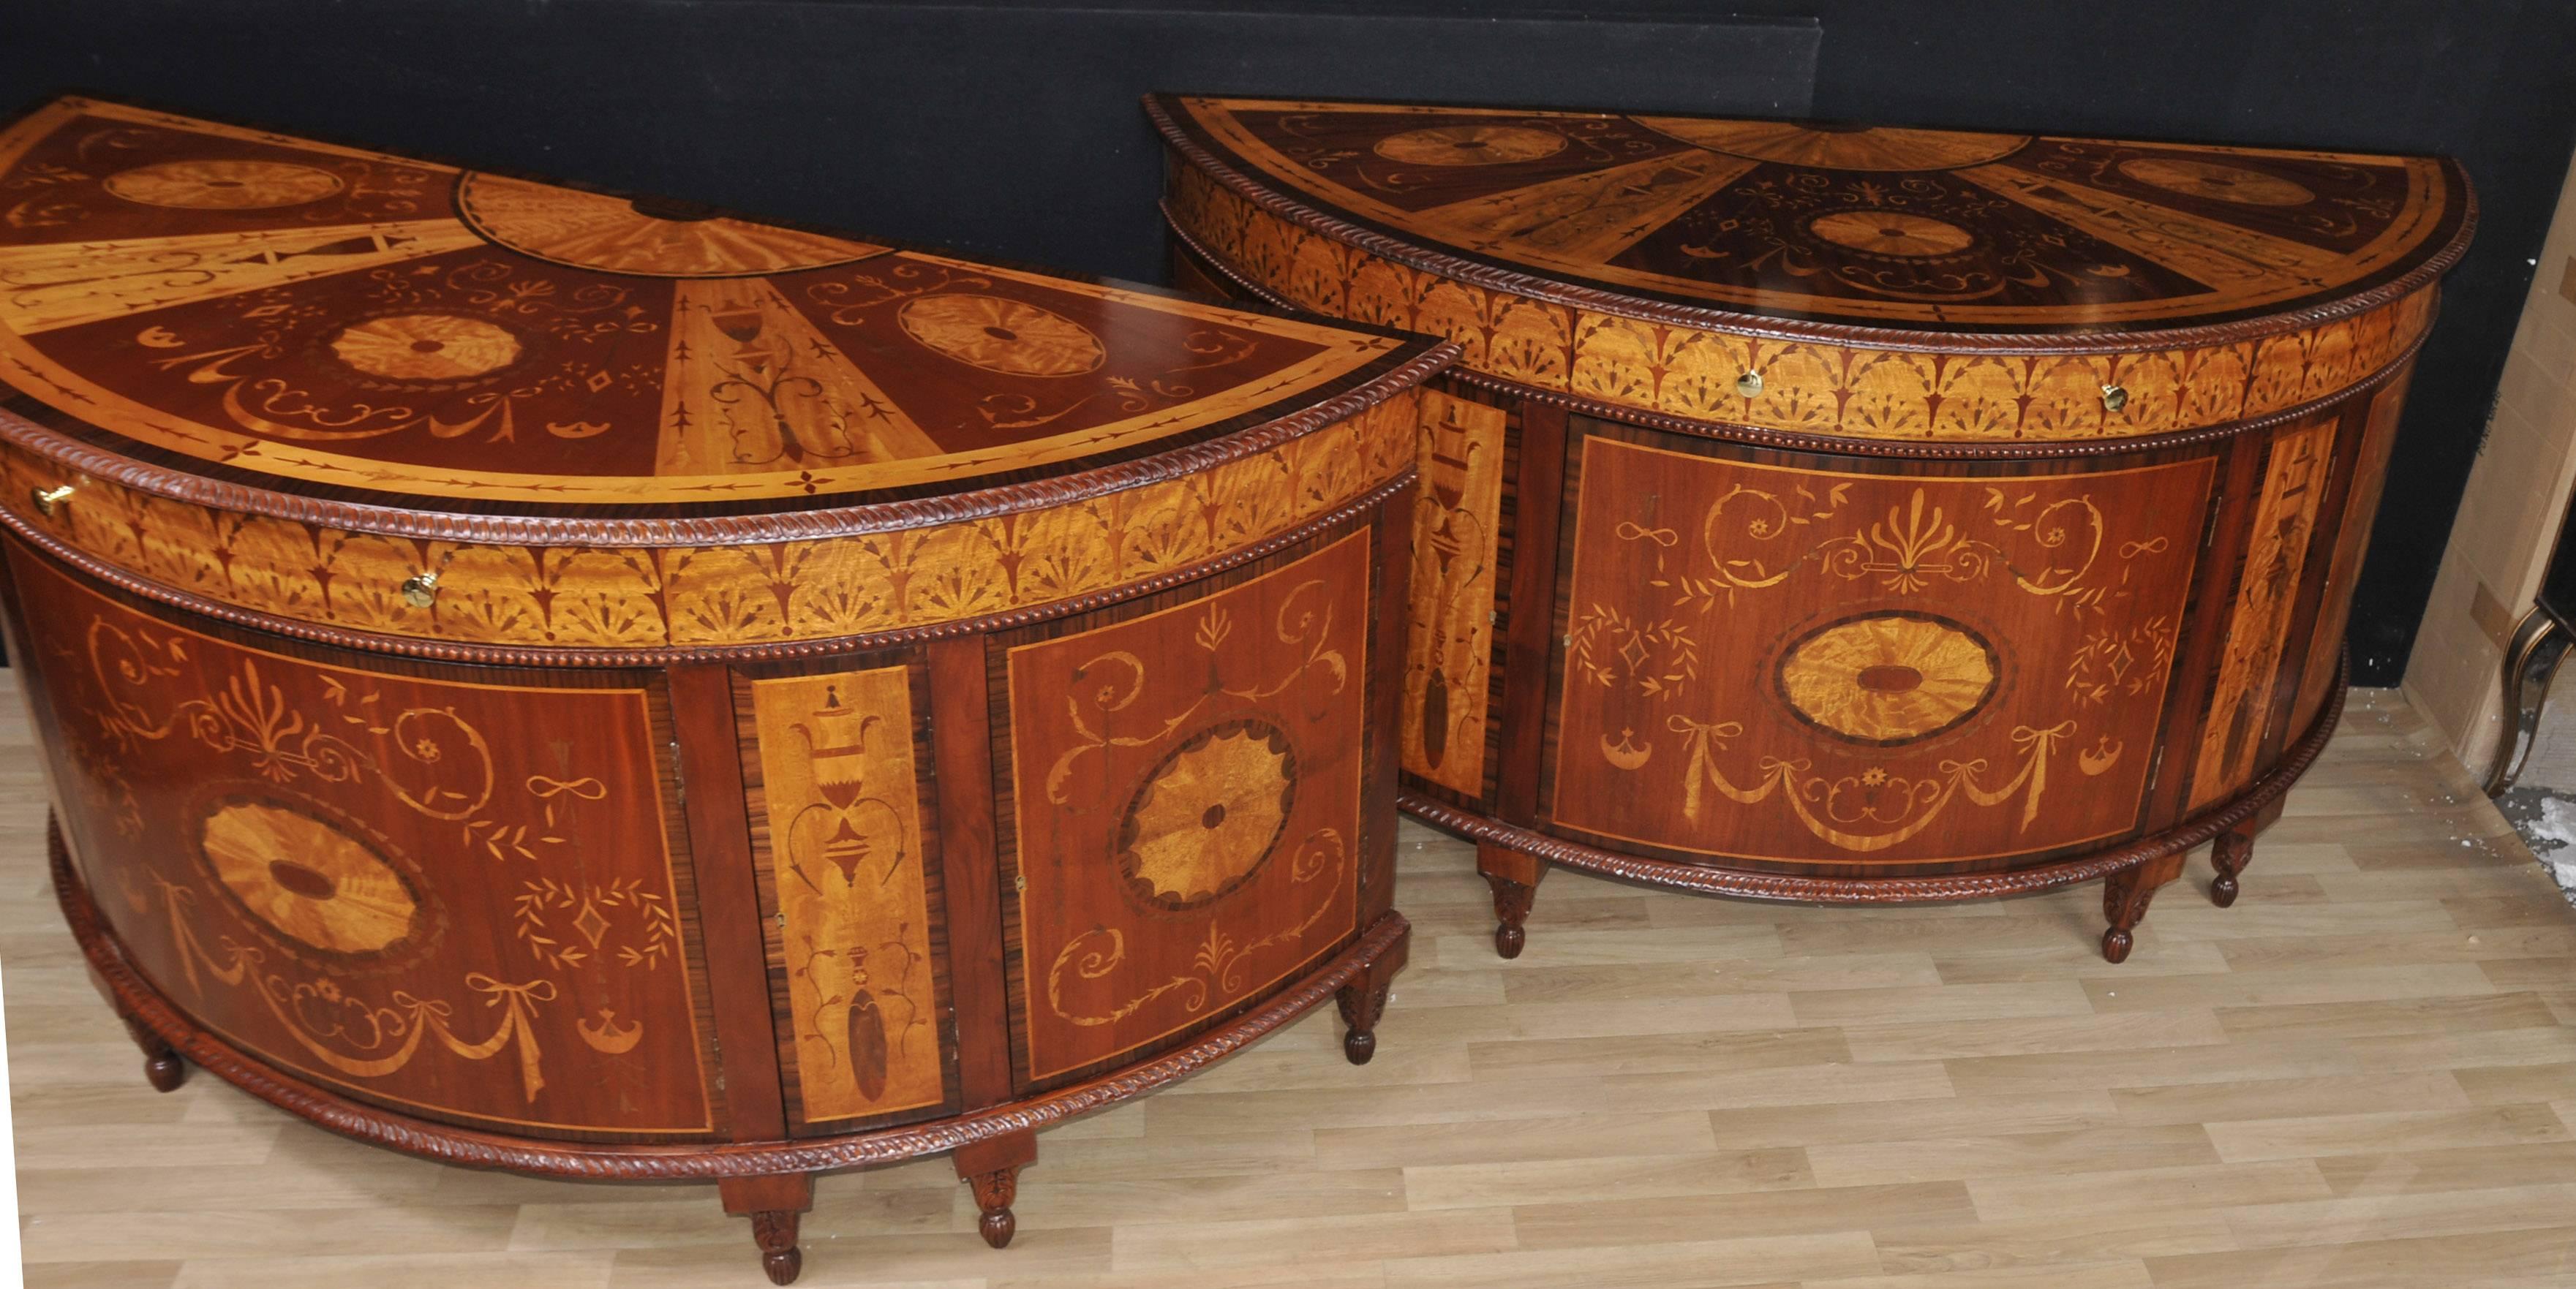 Pair of Regency Style Inlaid Commodes Demilune Cabinets Marquetry Inlay In Good Condition For Sale In Potters Bar, Herts